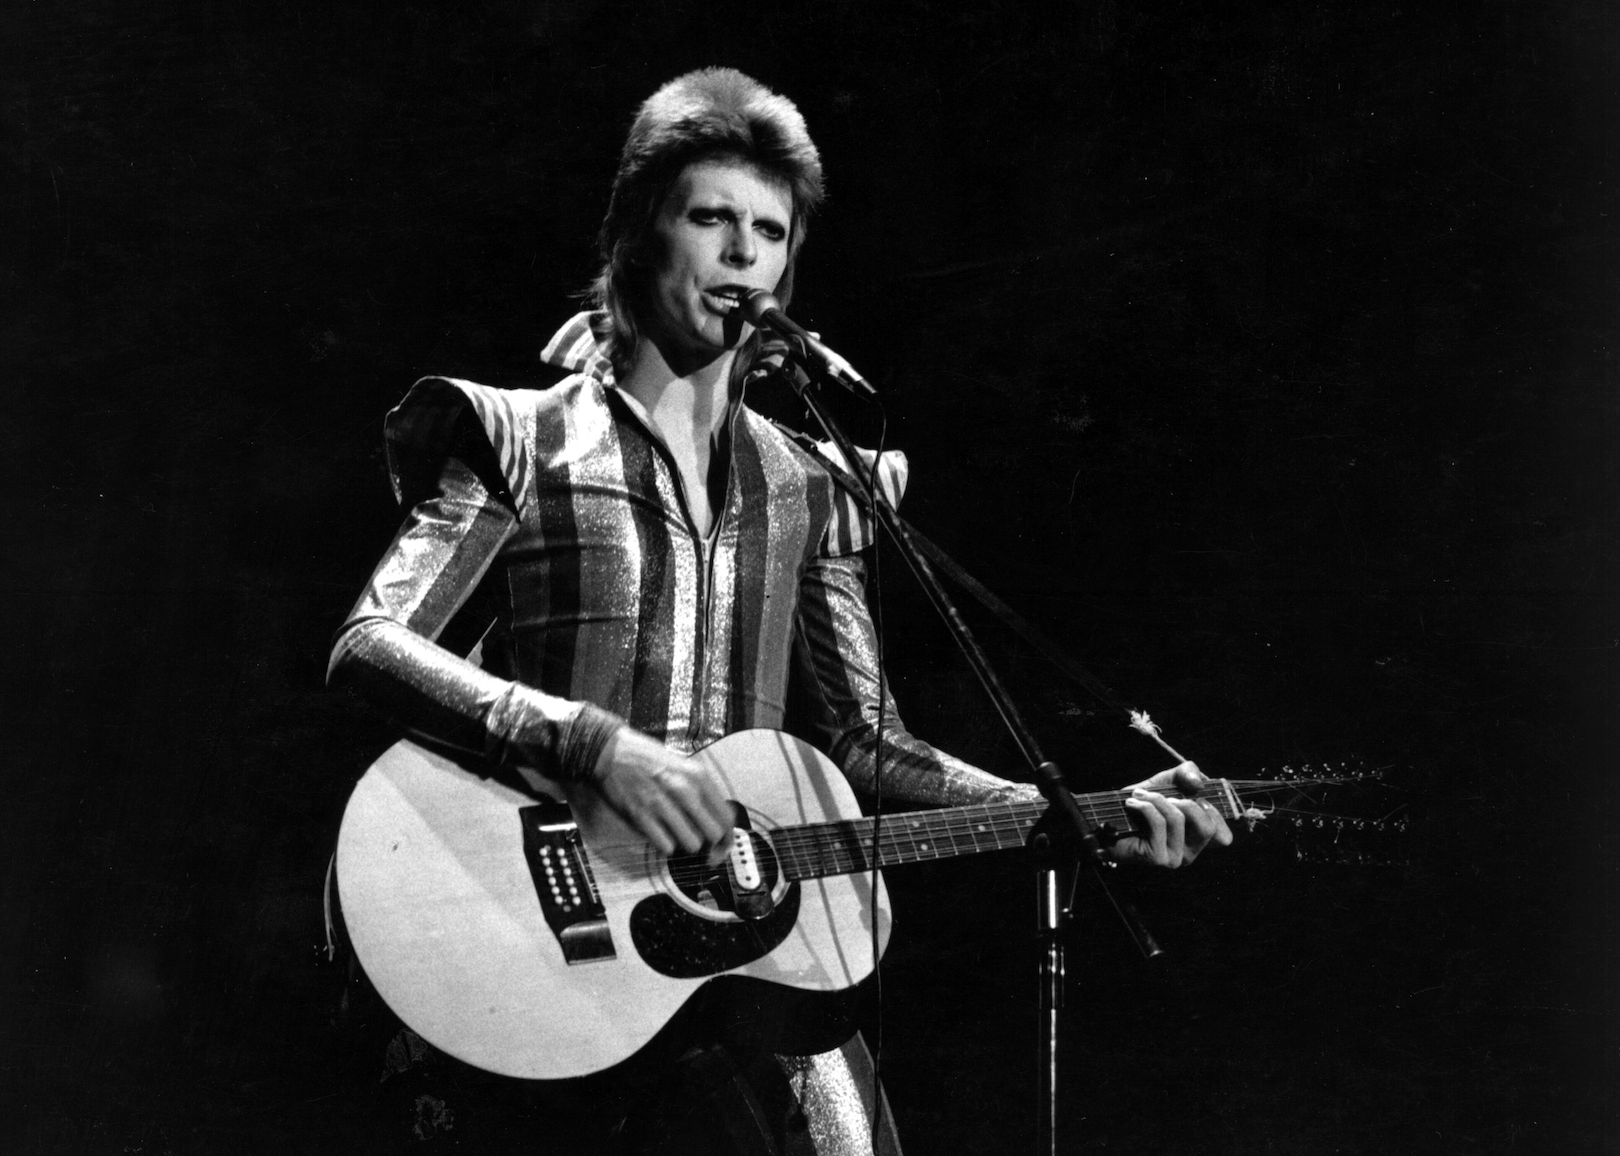 David Bowie onstage singing and playing guitar.